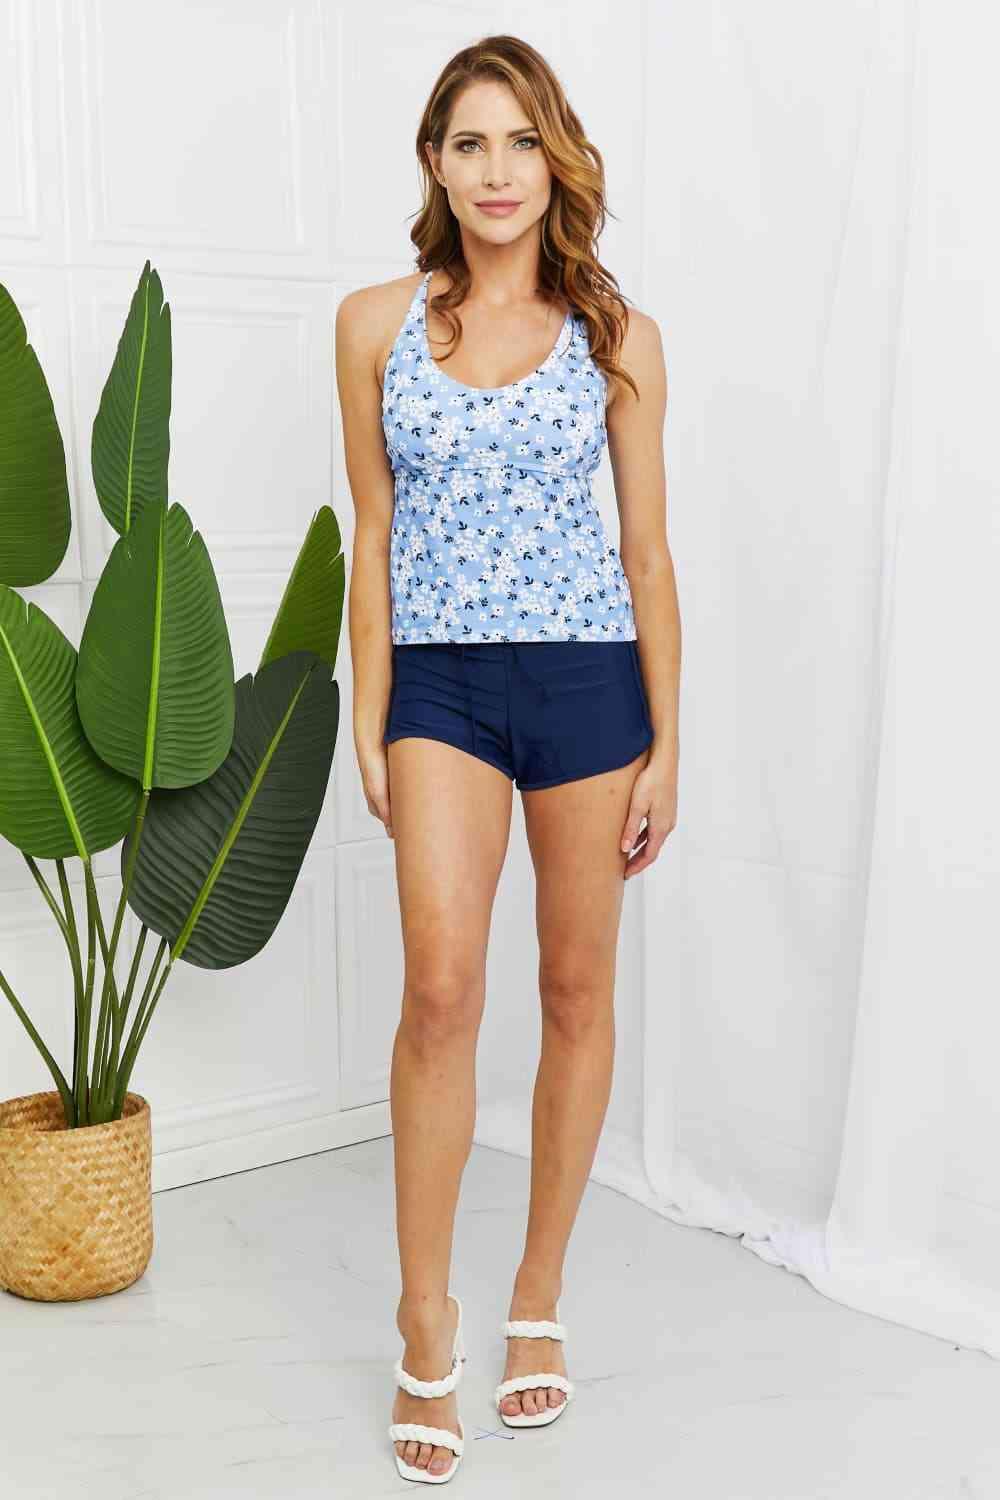 Marina West Swim By The Shore Full Size Two-Piece Swimsuit in Blossom Navy - Immenzive